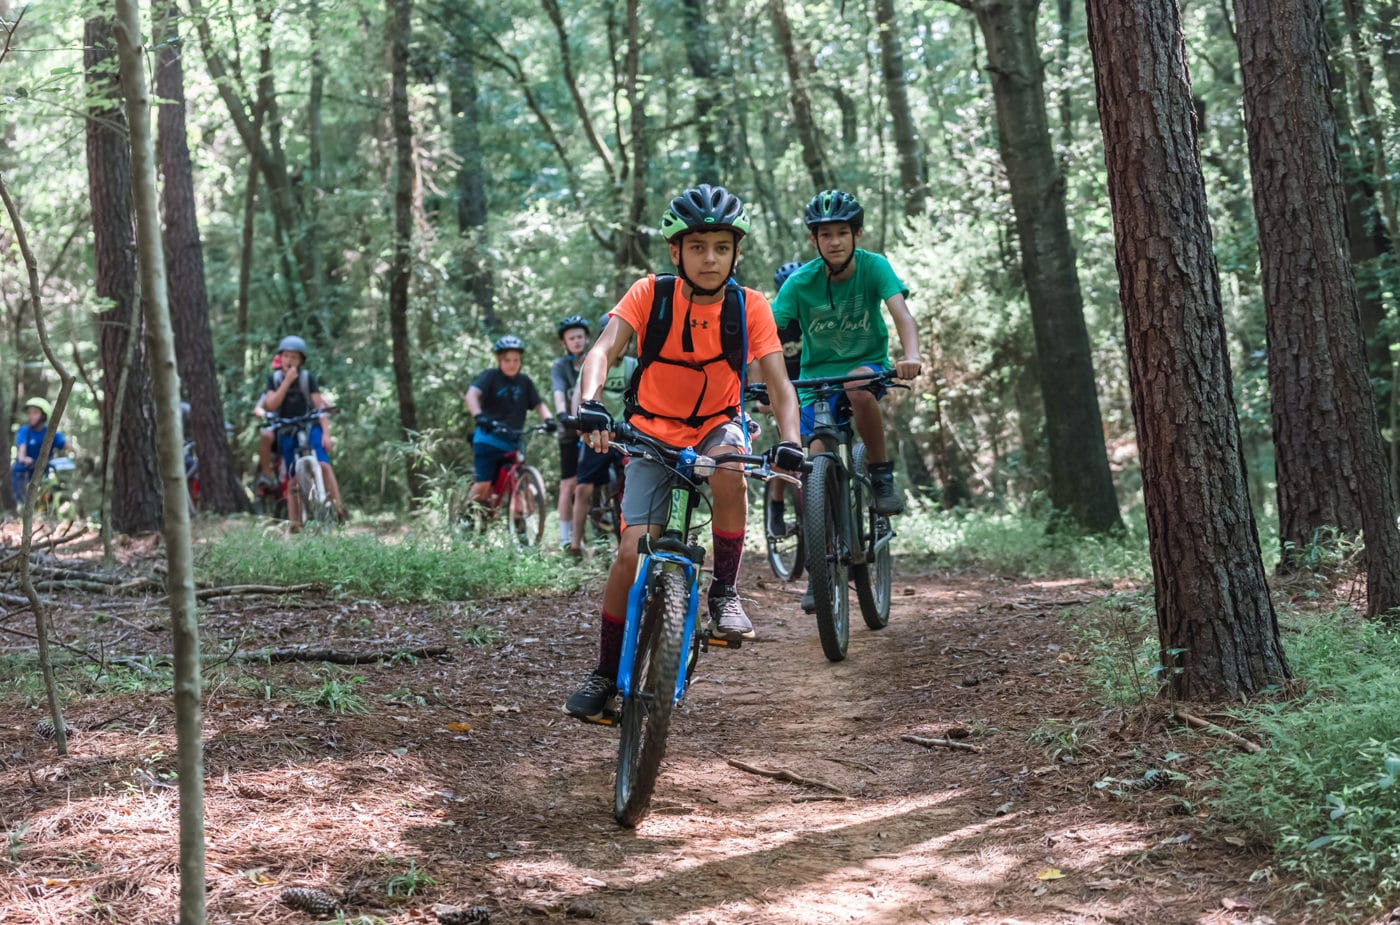 alt=Photos of young boys participating in the Mountain Bike Clinic Camp